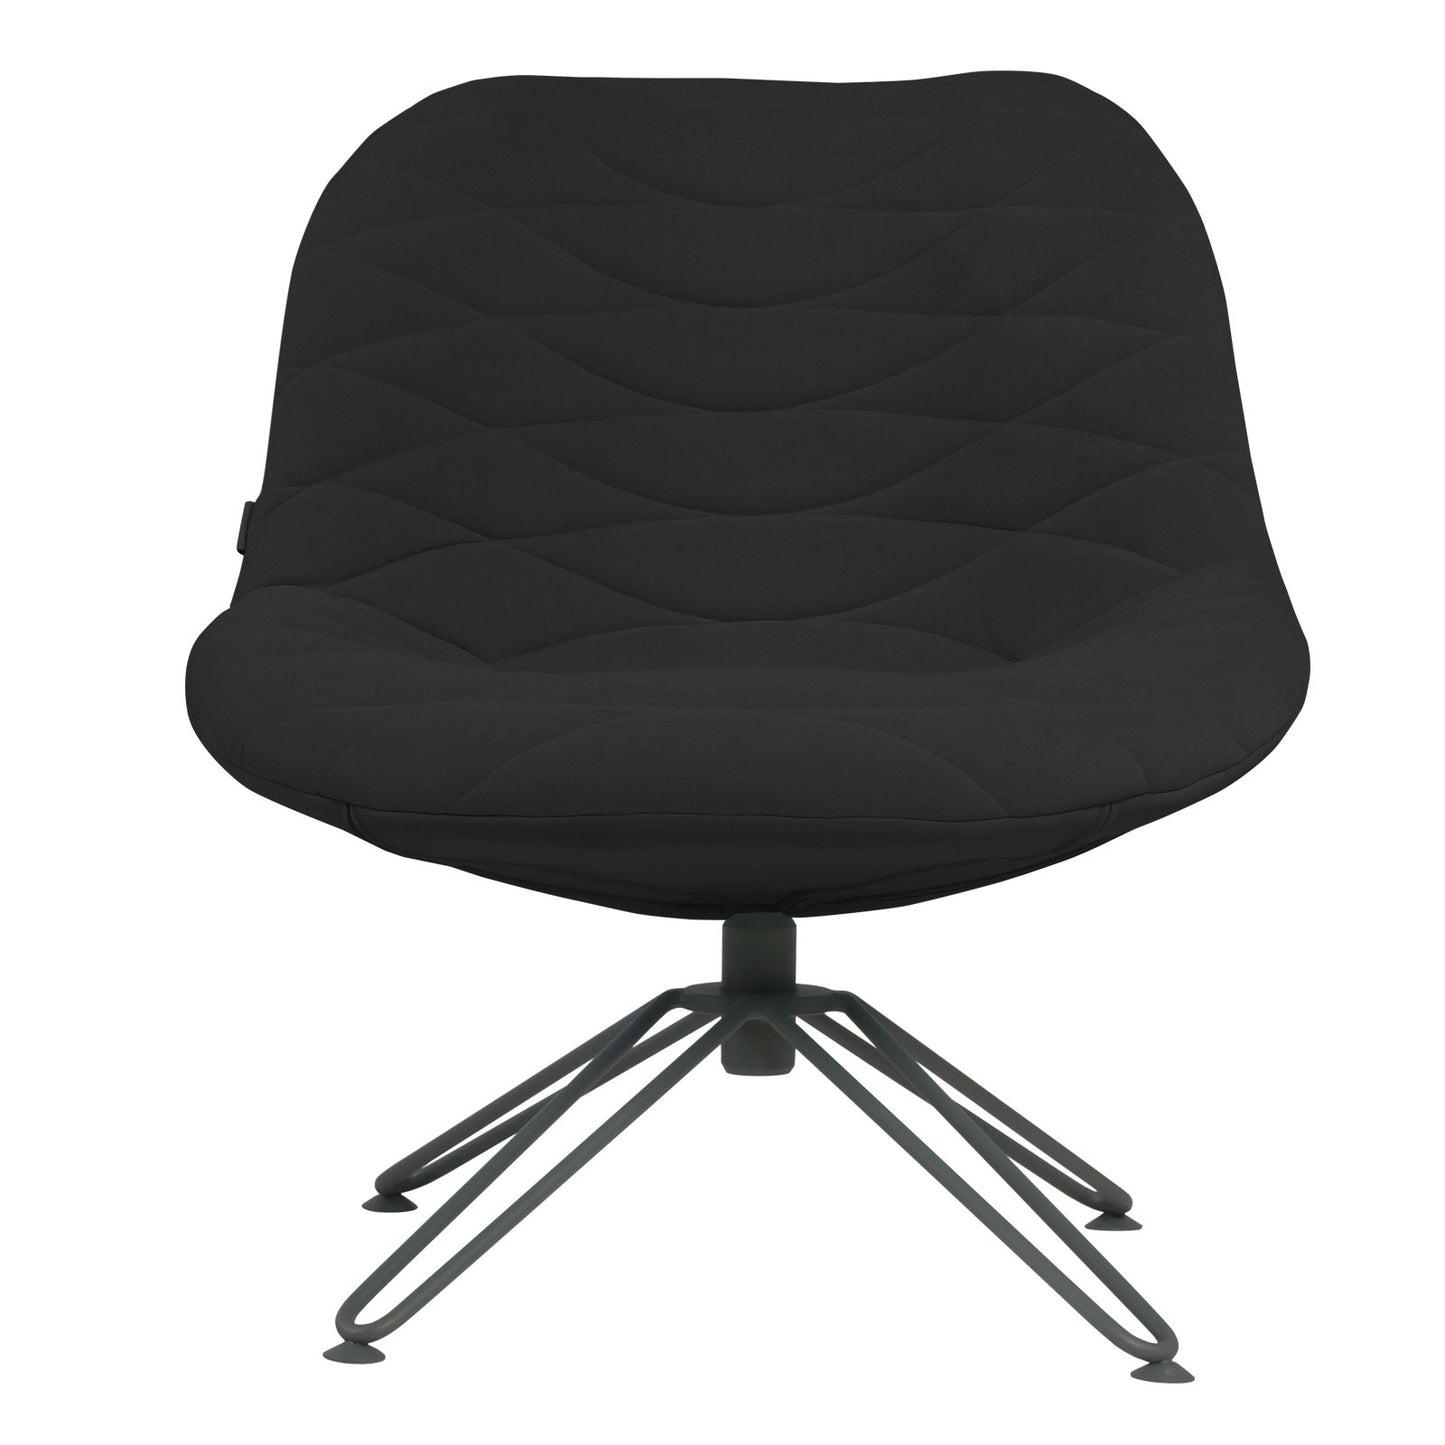 Lounge chair Mannequin Lounge 03 - Black